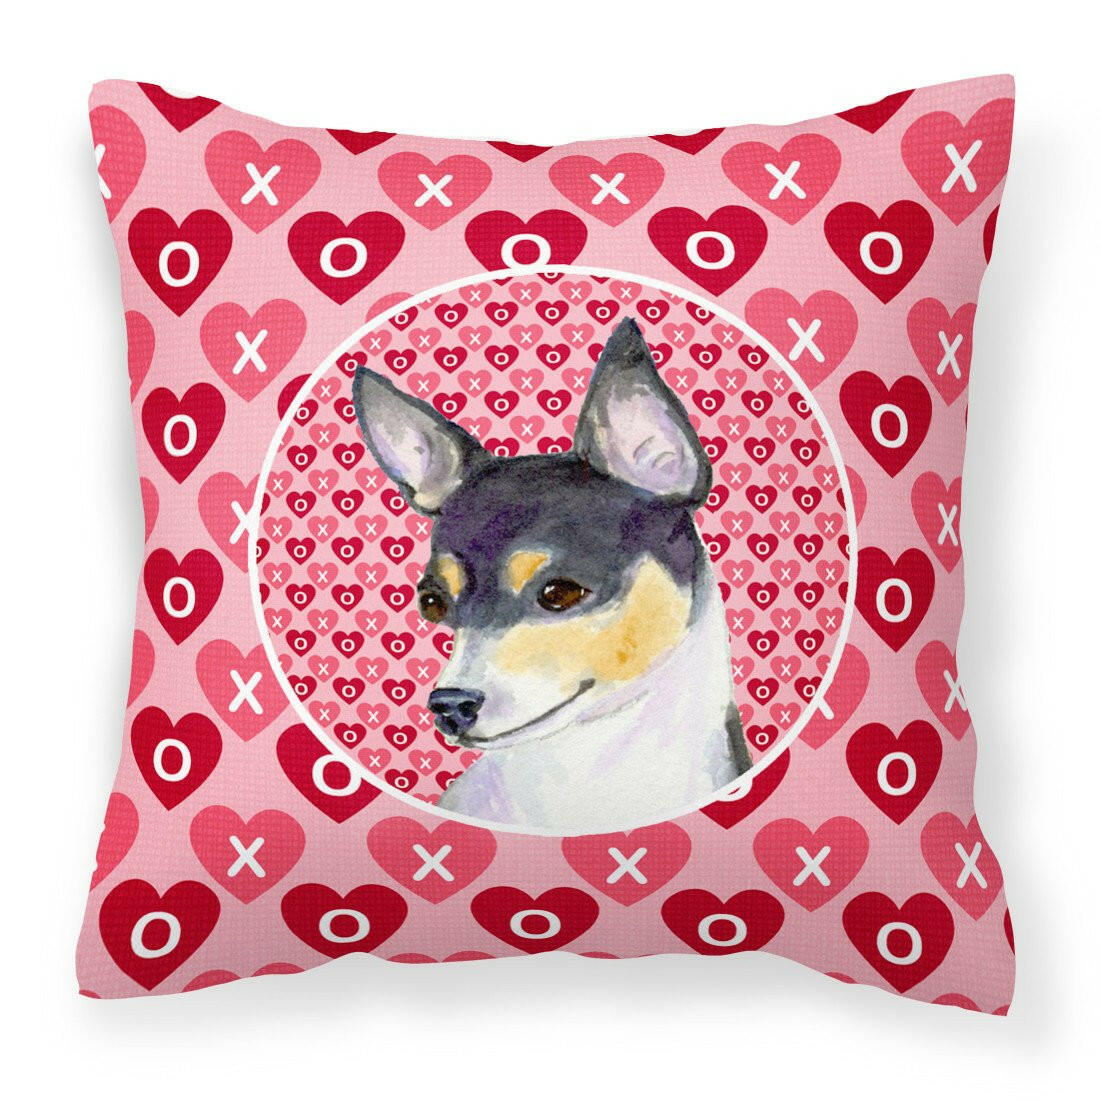 Chihuahua Hearts Love and Valentine's Day Portrait Fabric Decorative Pillow SS4518PW1414 by Caroline's Treasures